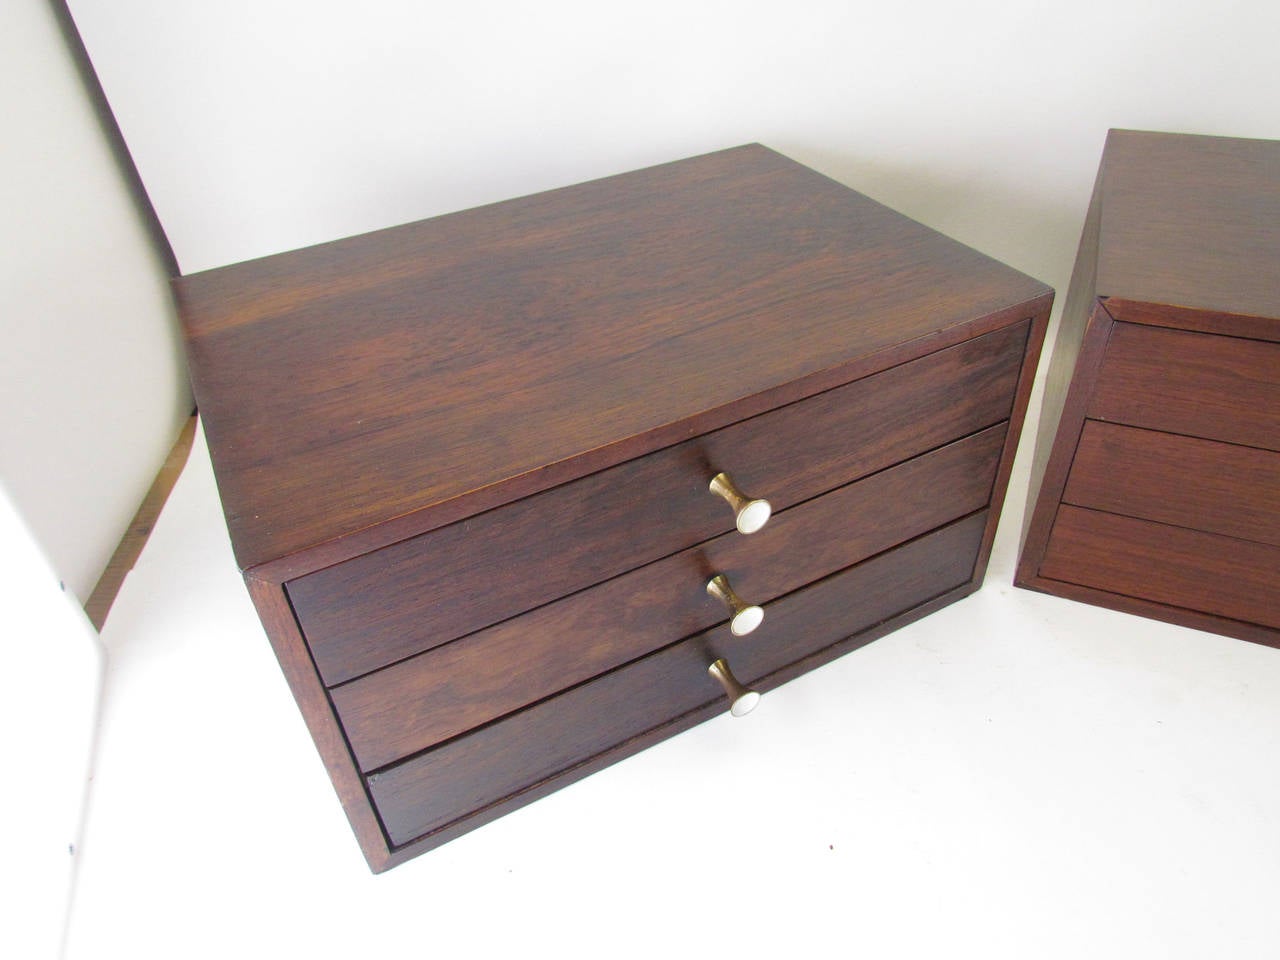 Unknown Pair of Danish Modern Rosewood Modernist Jewelry Boxes, circa 1960s